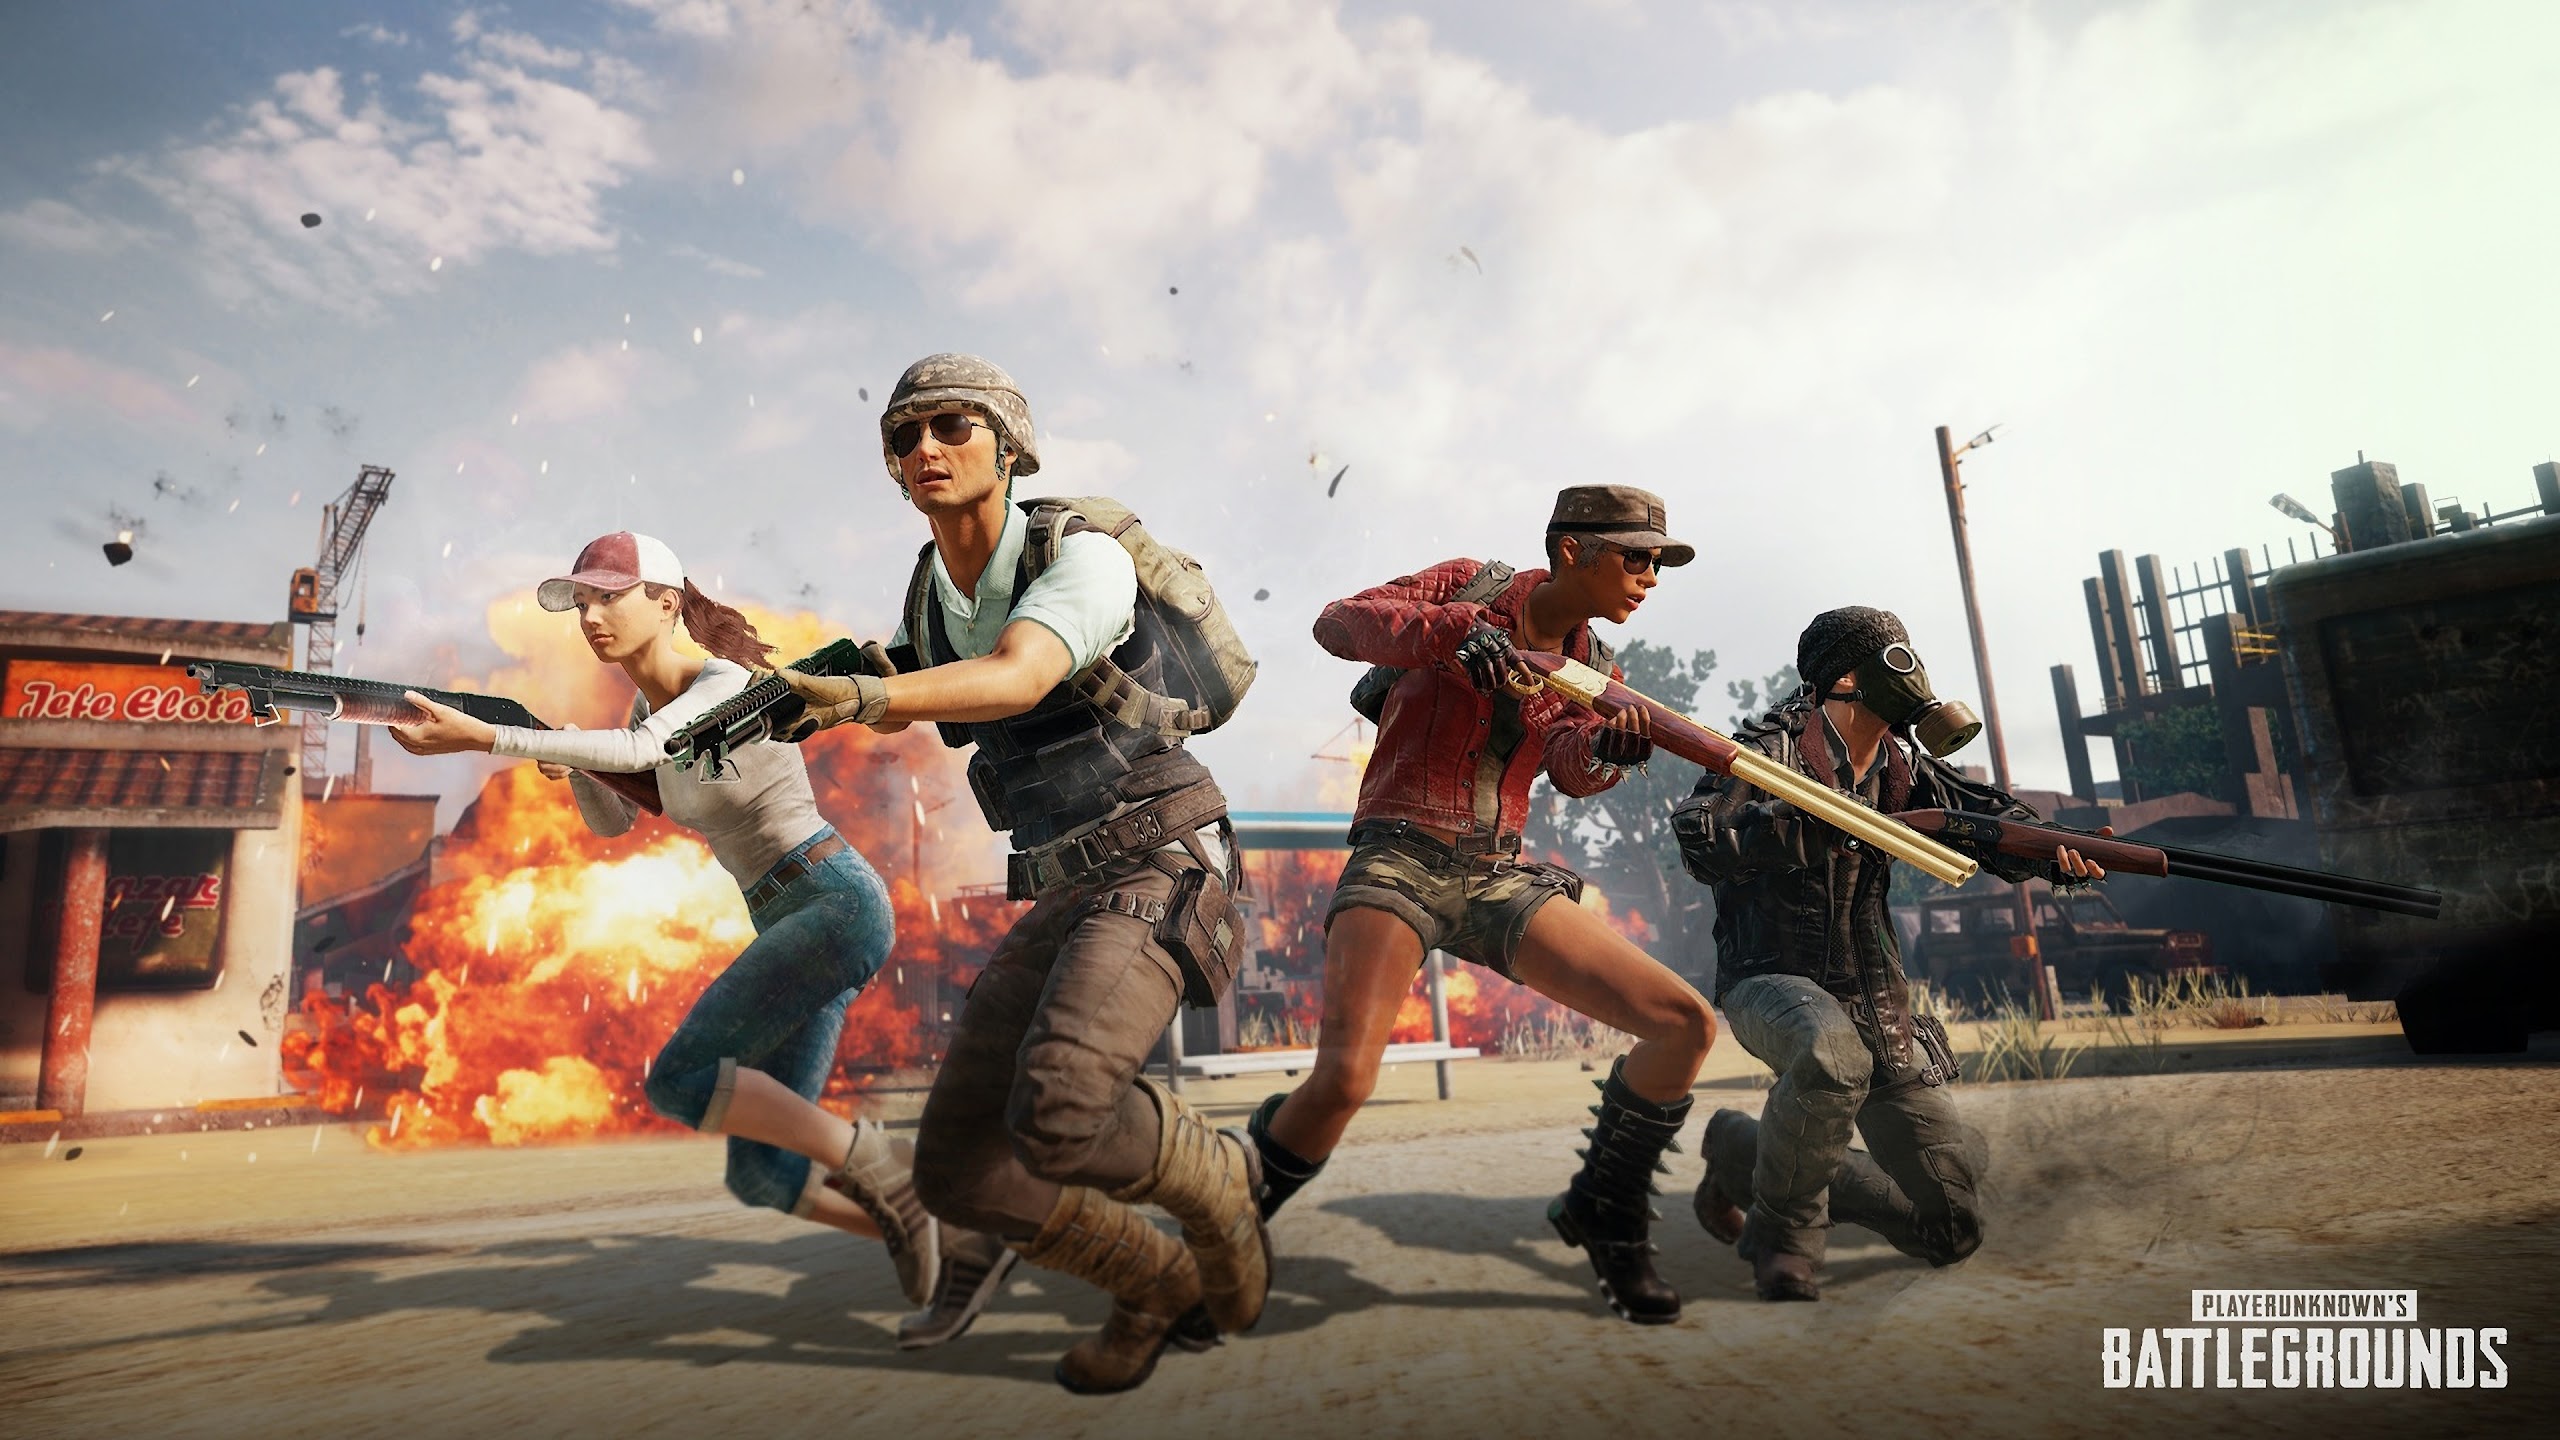 PUBG Will be Free To Play Starting in January - WHYD